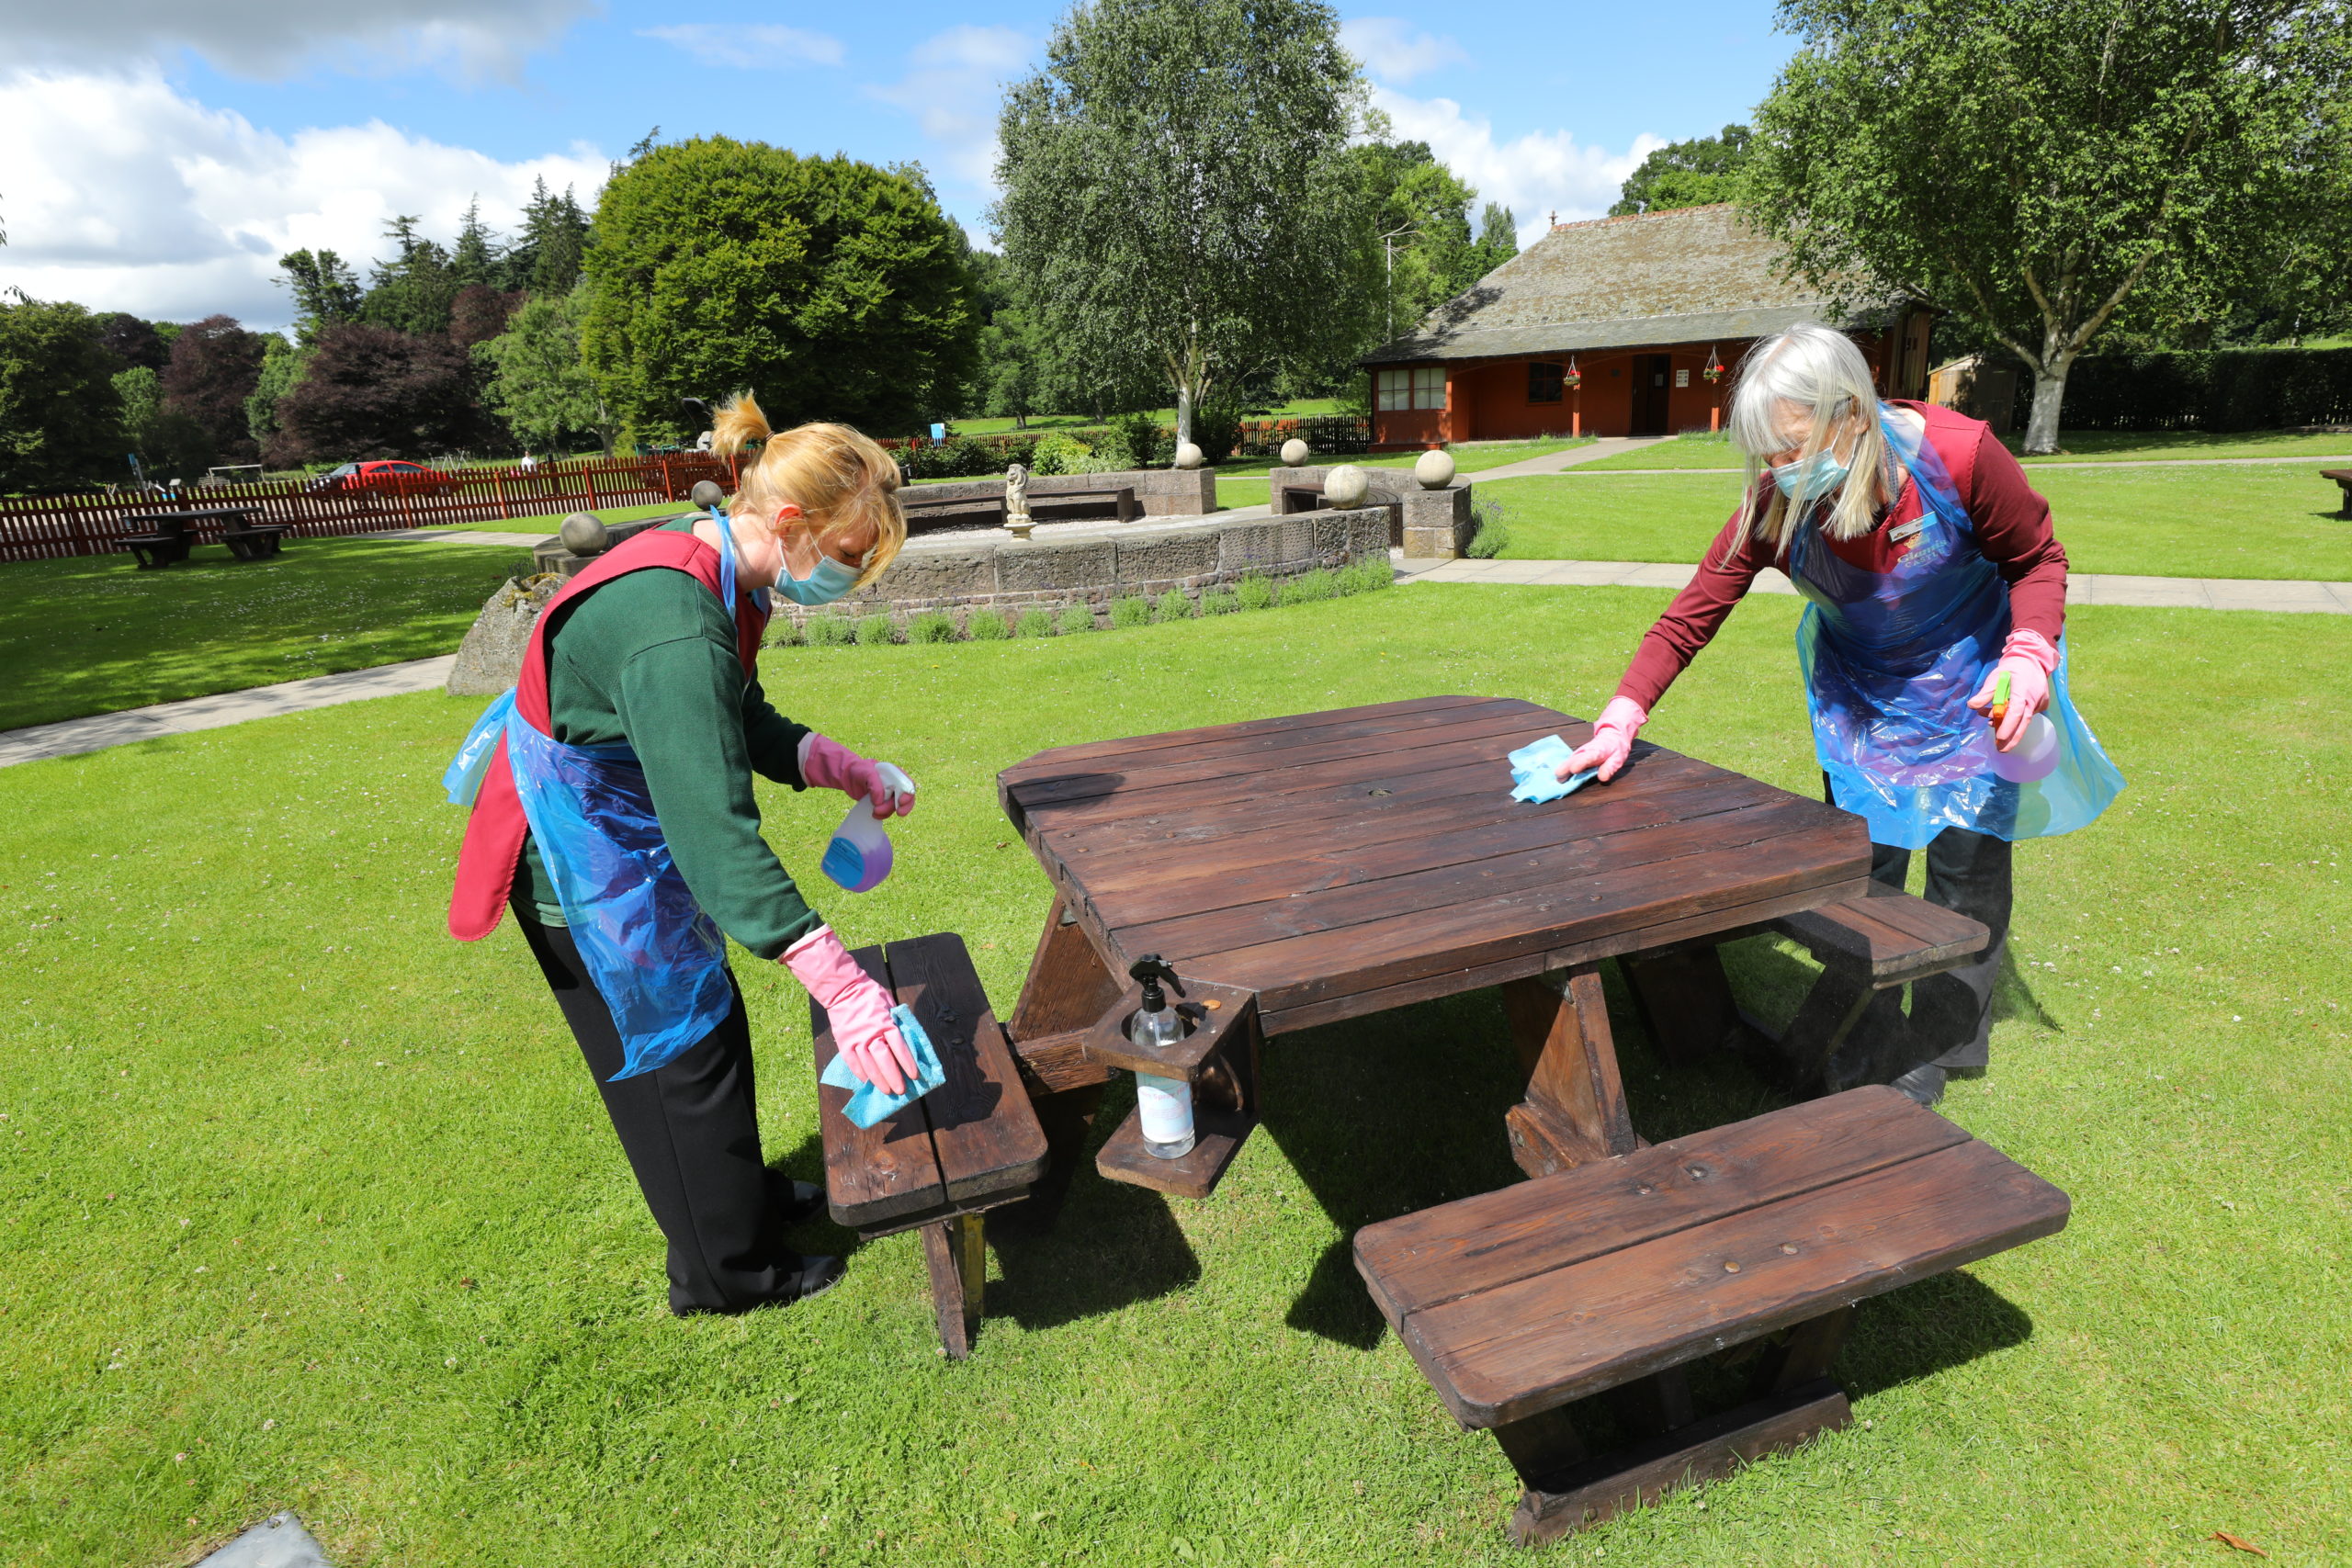 Cleaners Jamie Sheilds, left, and Wendy Greenhill wiping down one of the picnic benches at Glamis Castle.